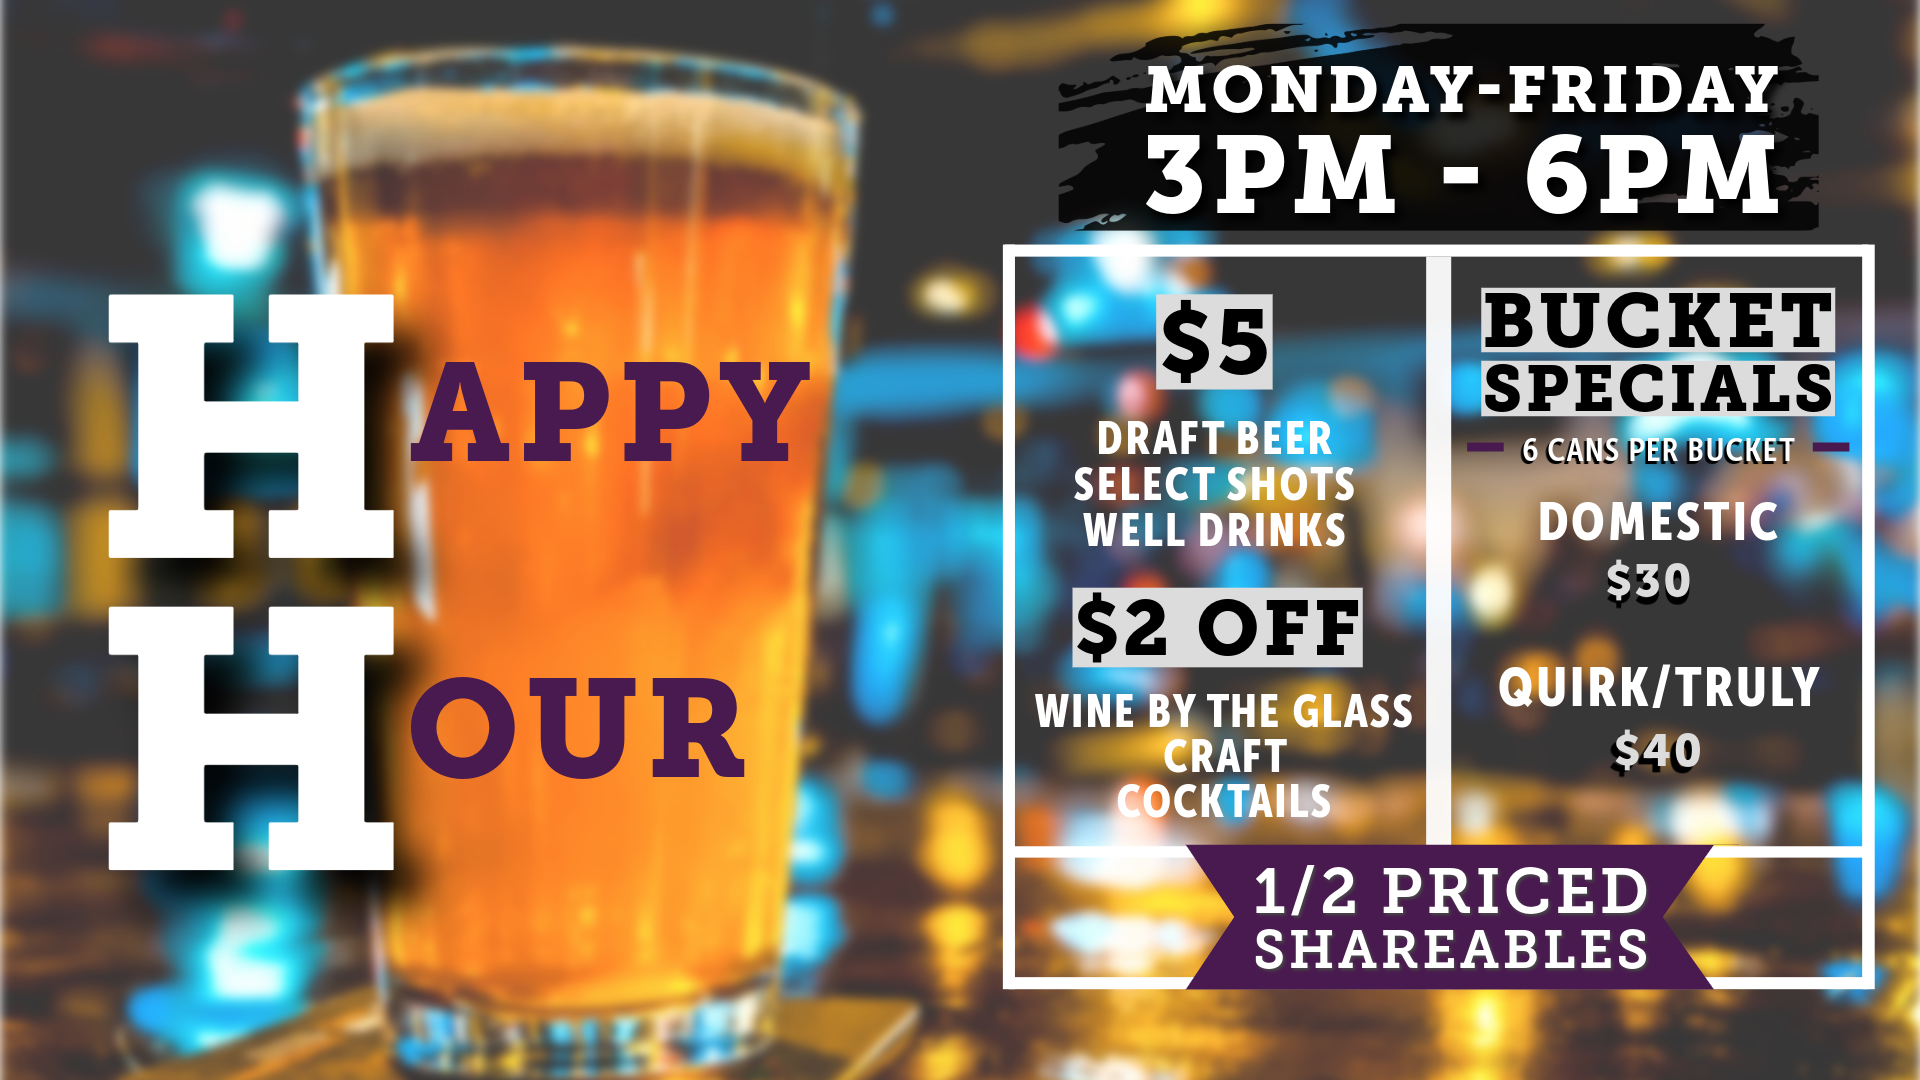 Check Out the Happy Hour Menu at T-Shotz Golf and Entertainment Venue